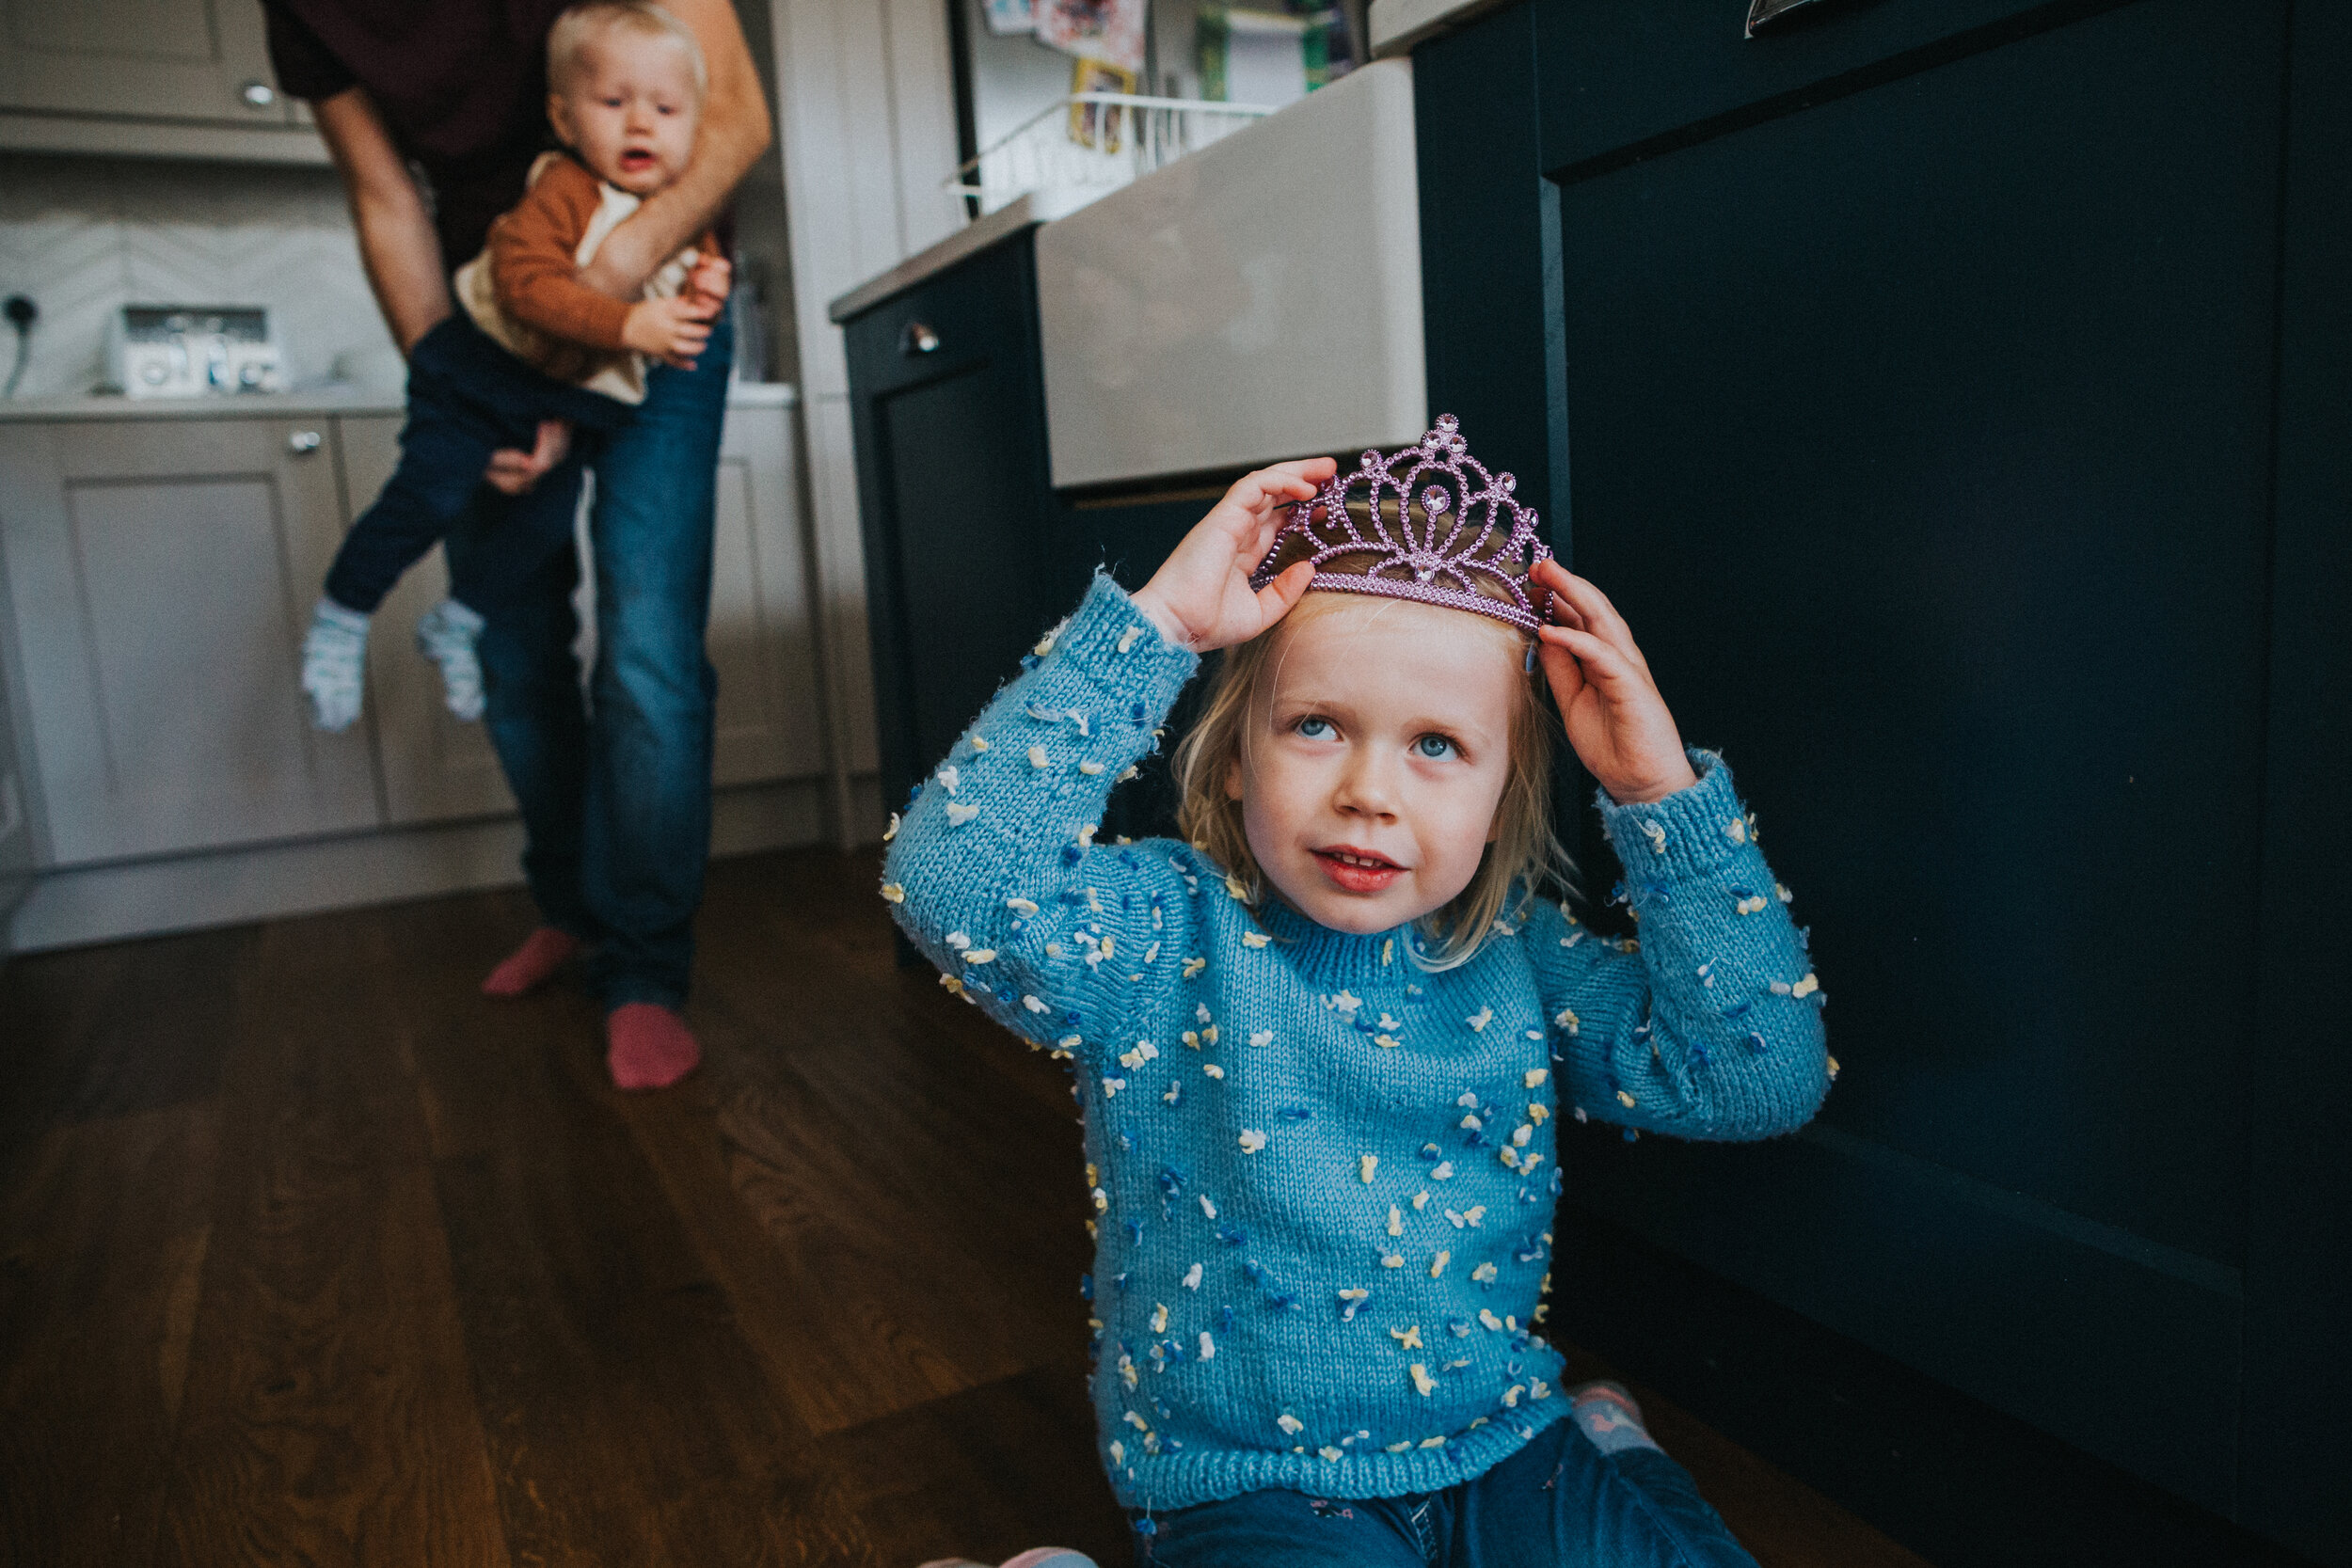 Little girl puts on crown as Dad approaches with her brother. 